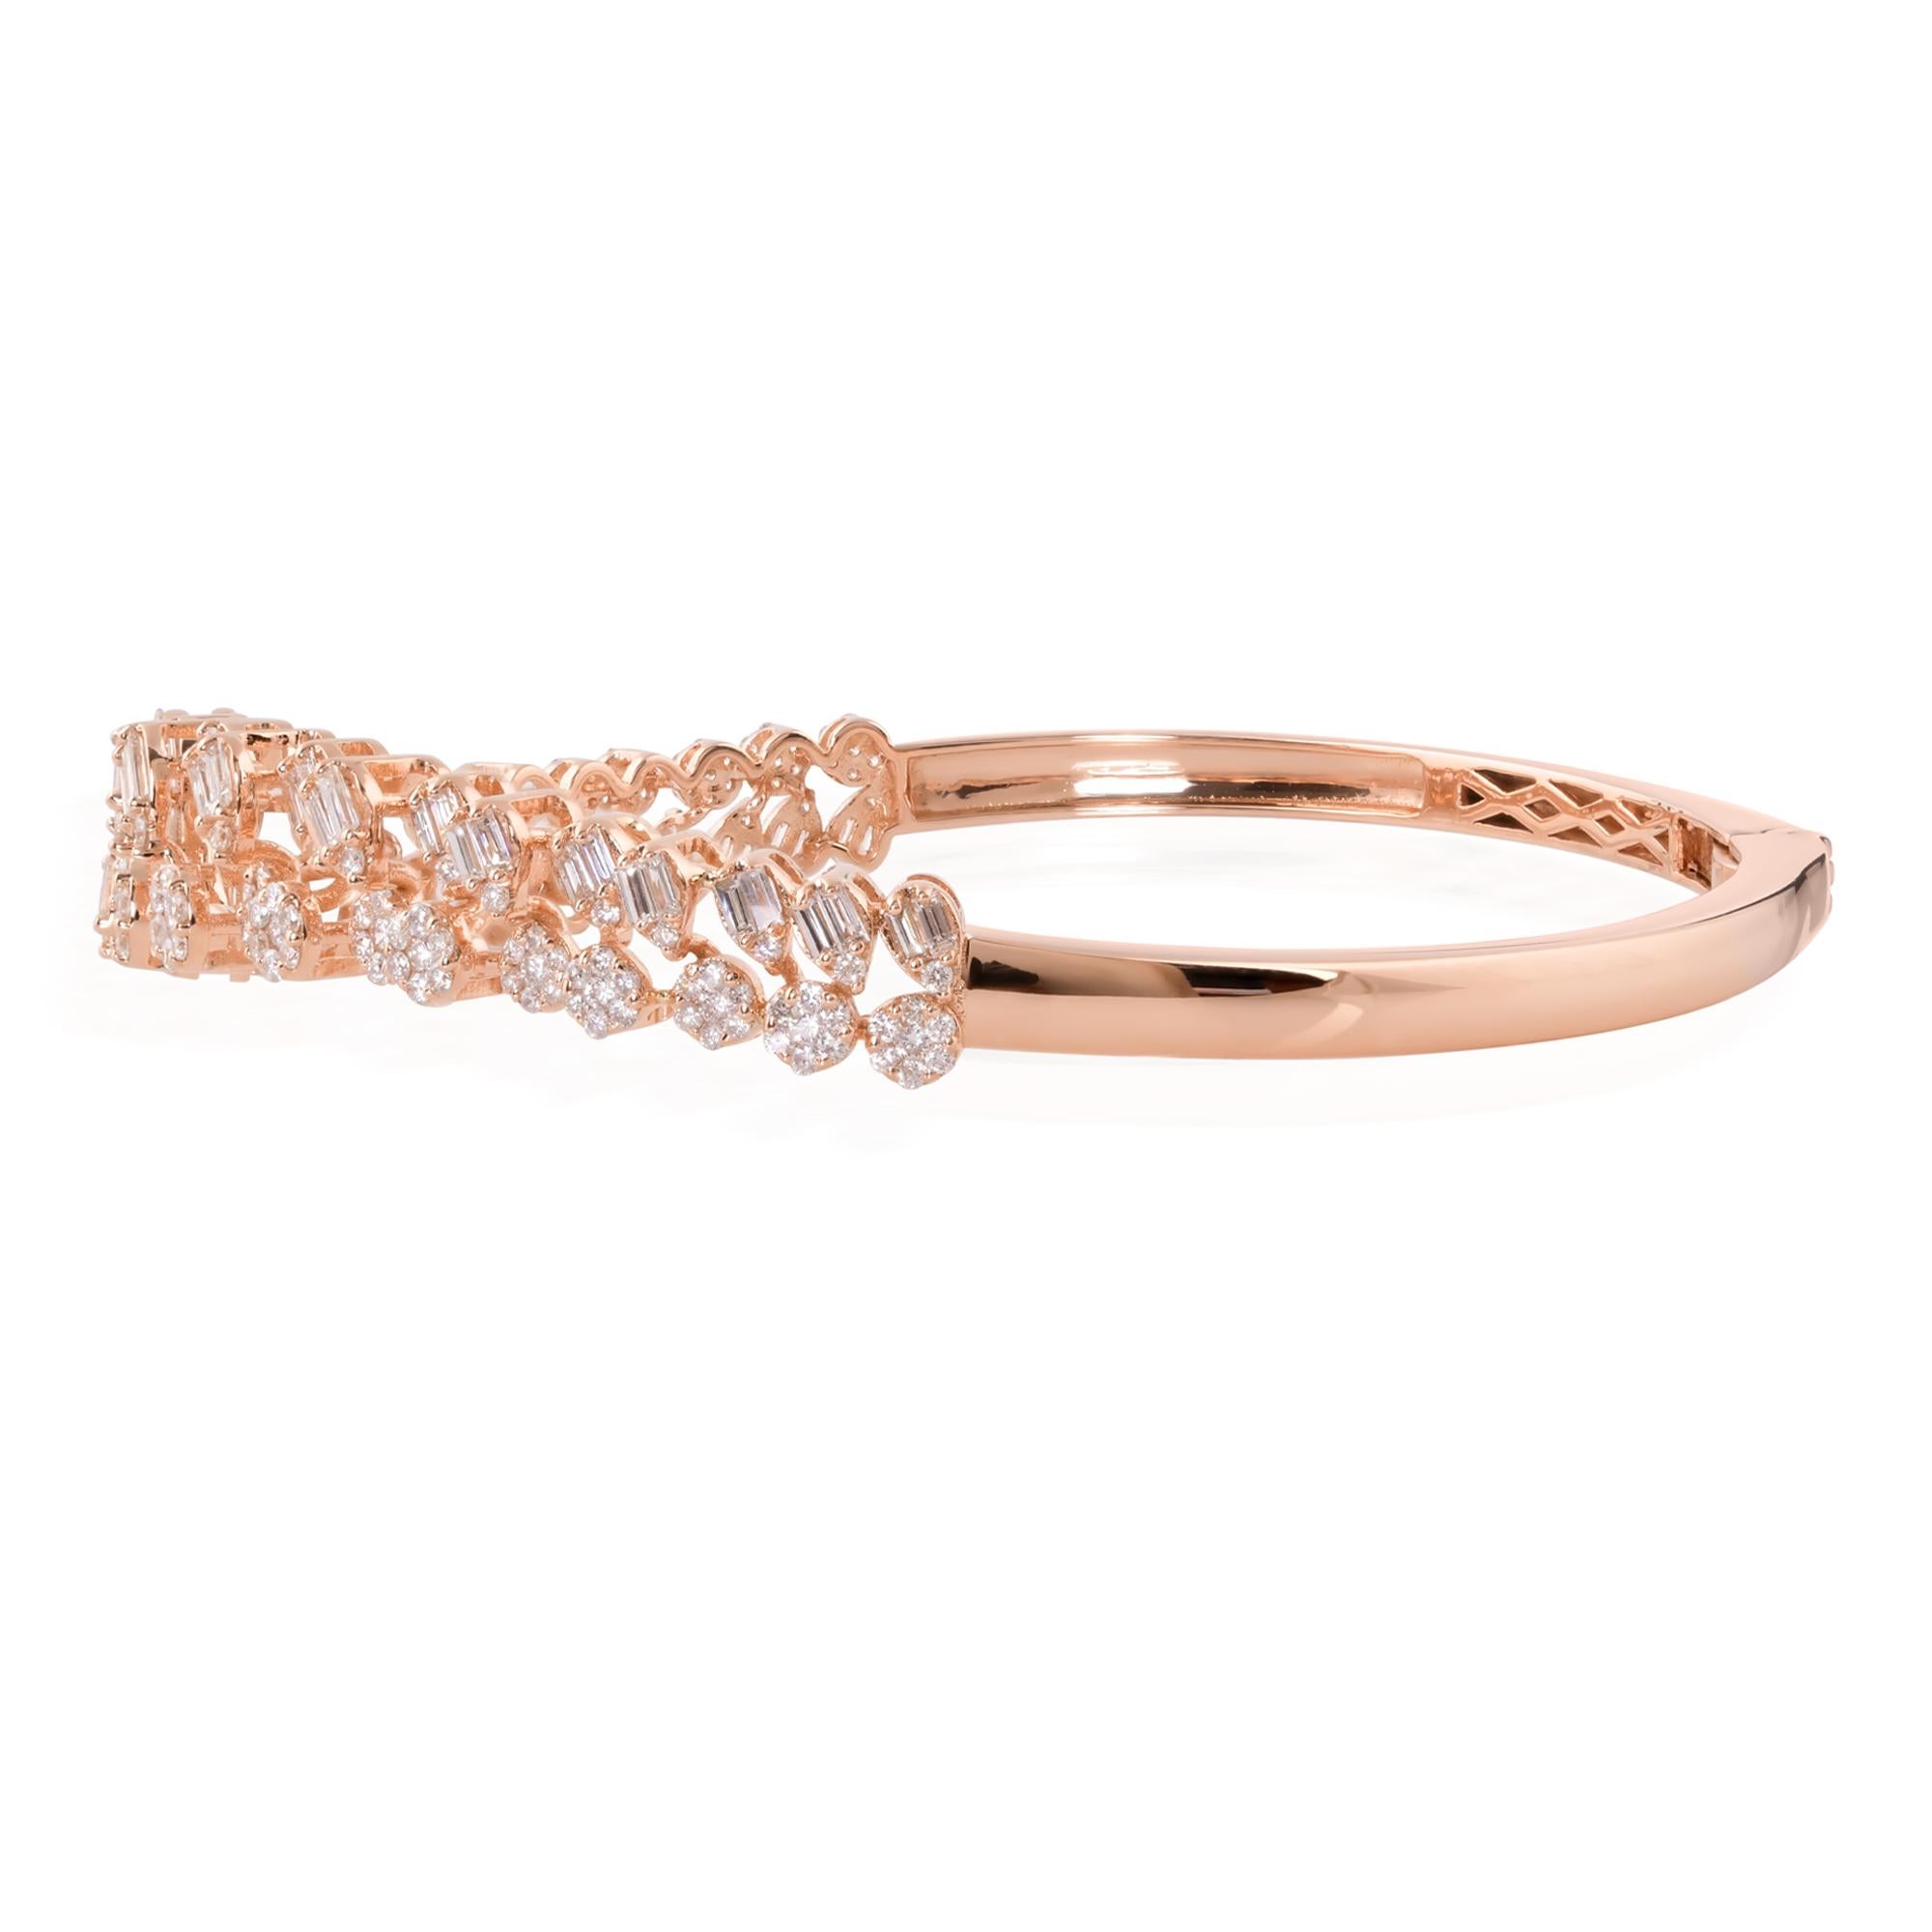 At the heart of this bangle bracelet lies a mesmerizing array of diamonds, meticulously selected and expertly set to maximize their brilliance and fire. The centerpiece features a combination of baguette and round-cut diamonds, arranged in a